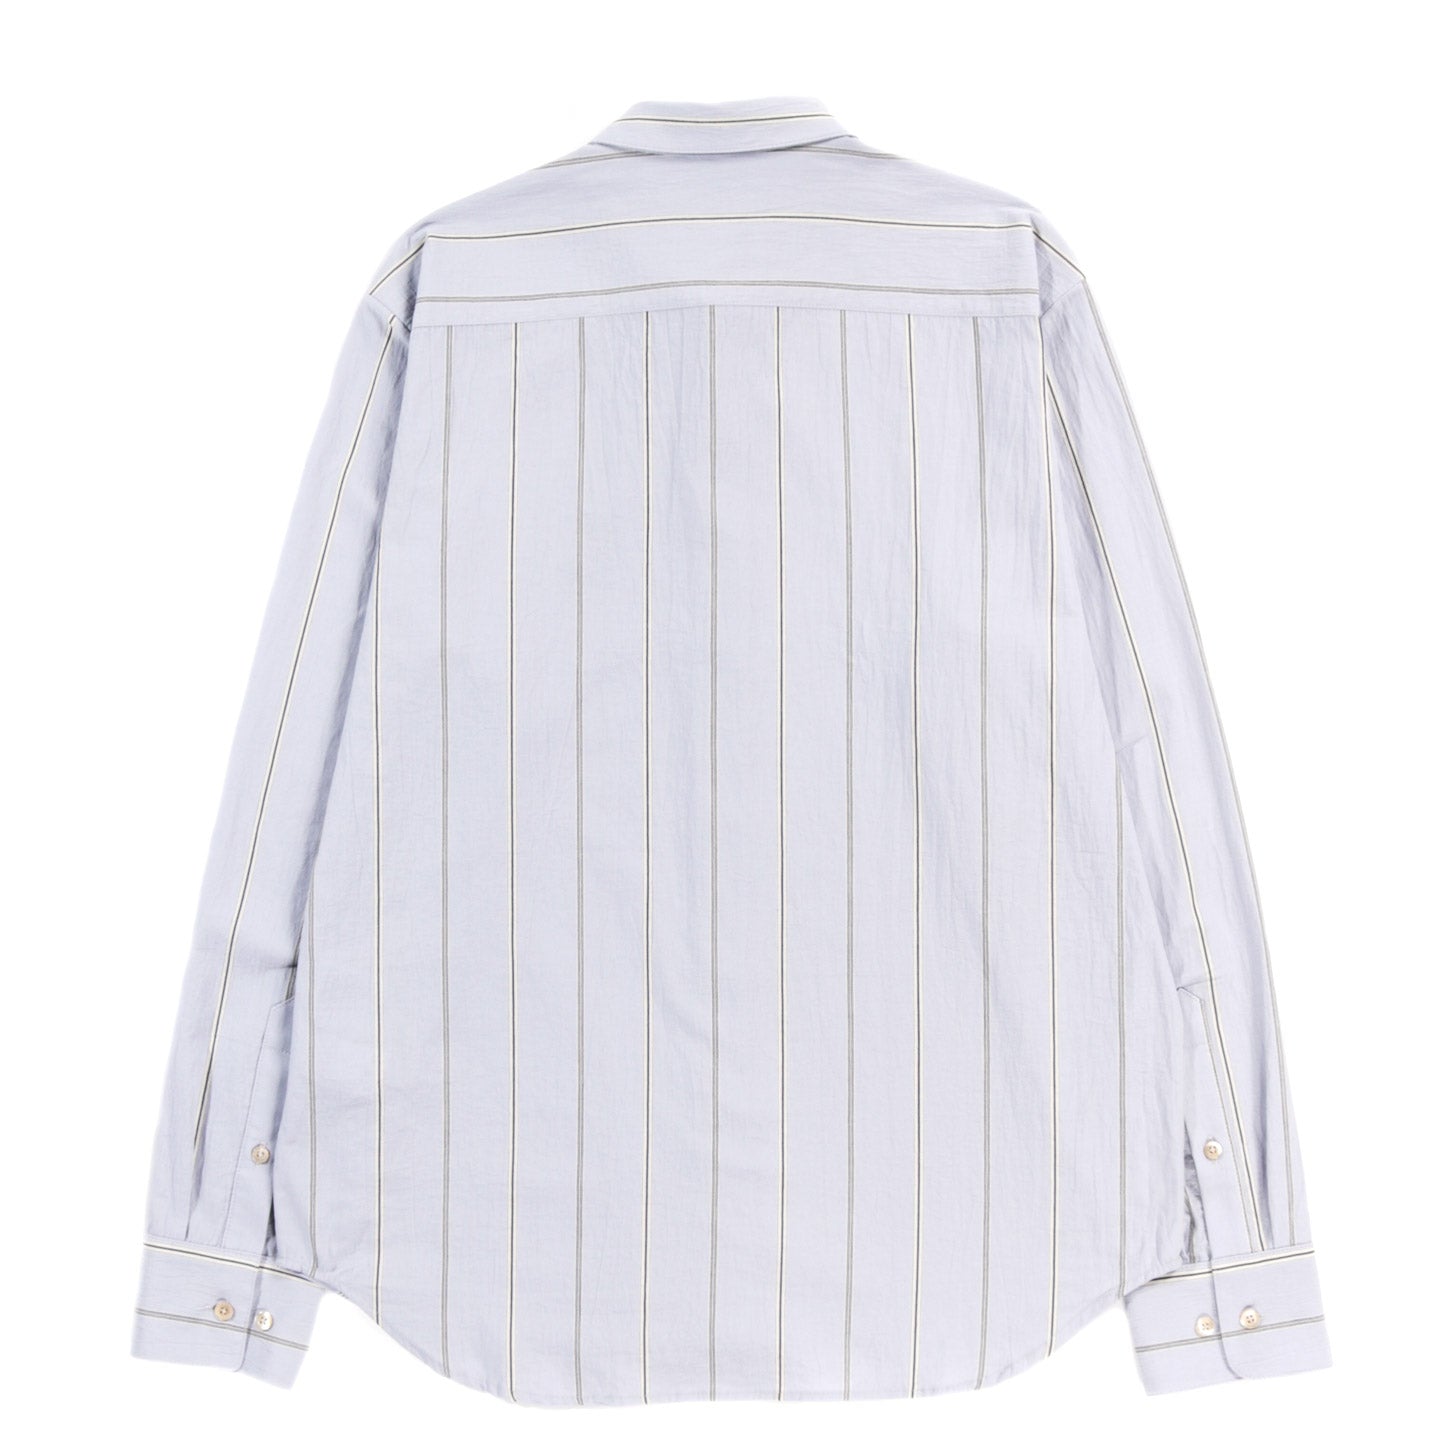 A KIND OF GUISE FLORES SHIRT TINTED ICE STRIPE